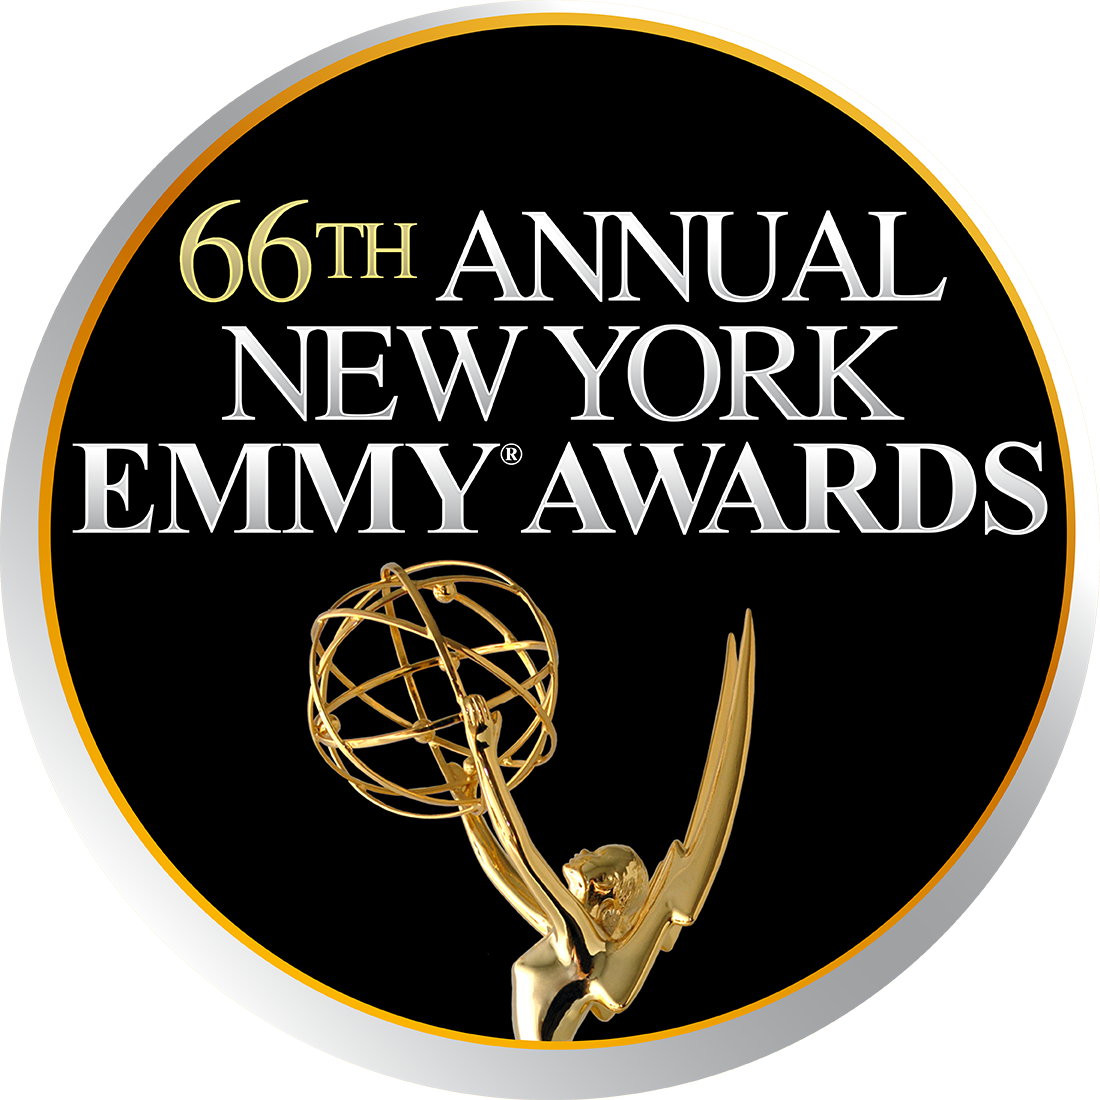 CONGRATULATIONS TO ALL OF OUR 66TH ANNUAL NY EMMY® AWARDS & 1ST ANNUAL NY SPORTS EMMY® AWARDS NOMINEES!